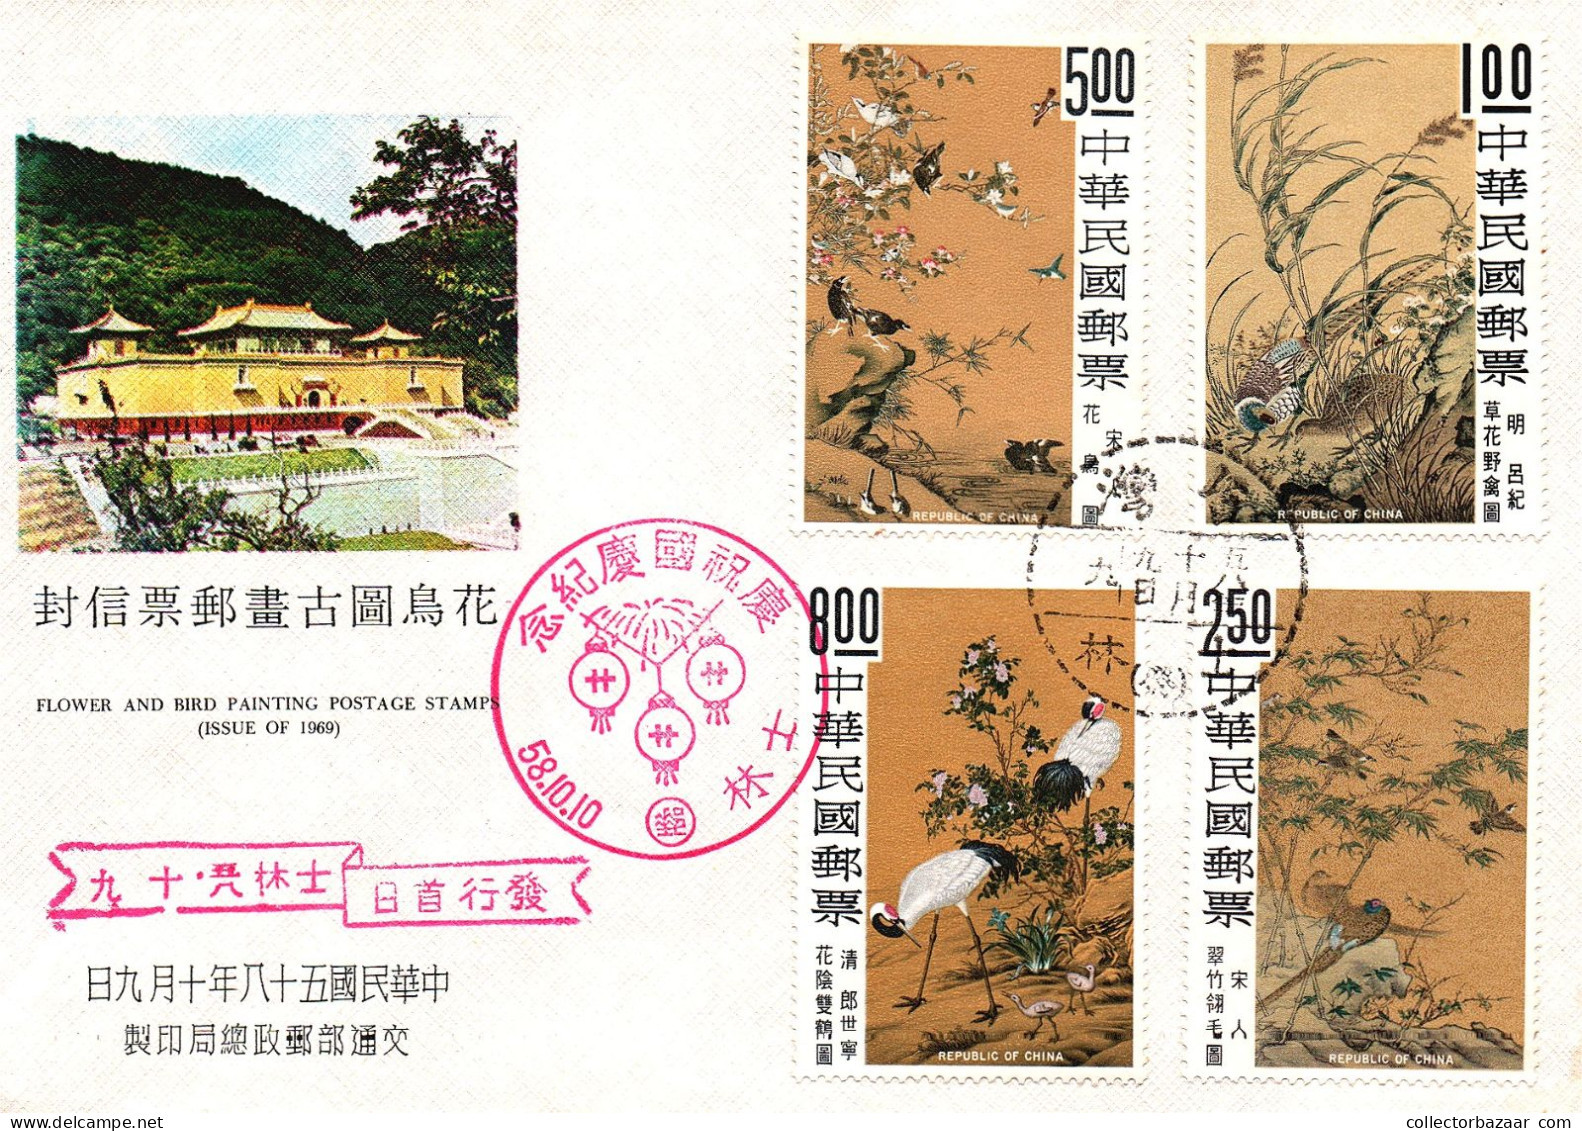 1969Taiwan Formosa Republic Of China FDC Art Painting About Flowers And Birds Issue Of 1969 - 8$, 5$, 2.50$ And 1$ Stamp - FDC